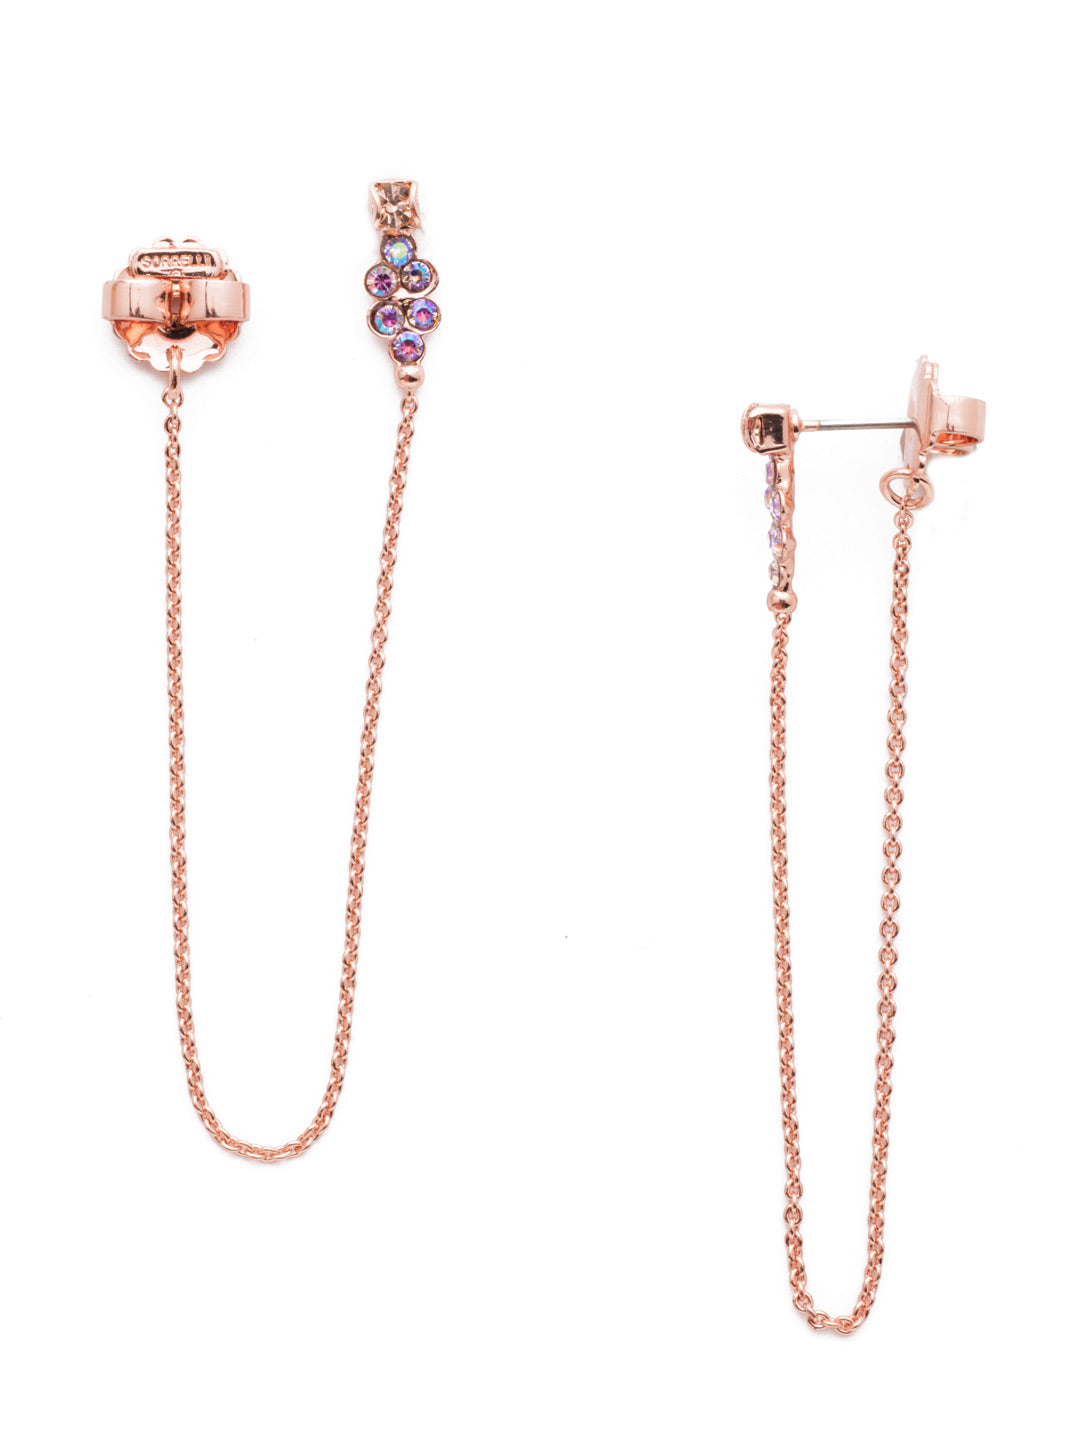 Faye Statement Earrings - EEN73RGLVP - <p>The Faye Statement Earrings are special. Start from the top and fasten on elegant crystal stones that sparkle. Then get ready for the edgy dangle of a fun metal strand. They're ready for their night out. From Sorrelli's Lavender Peach collection in our Rose Gold-tone finish.</p>